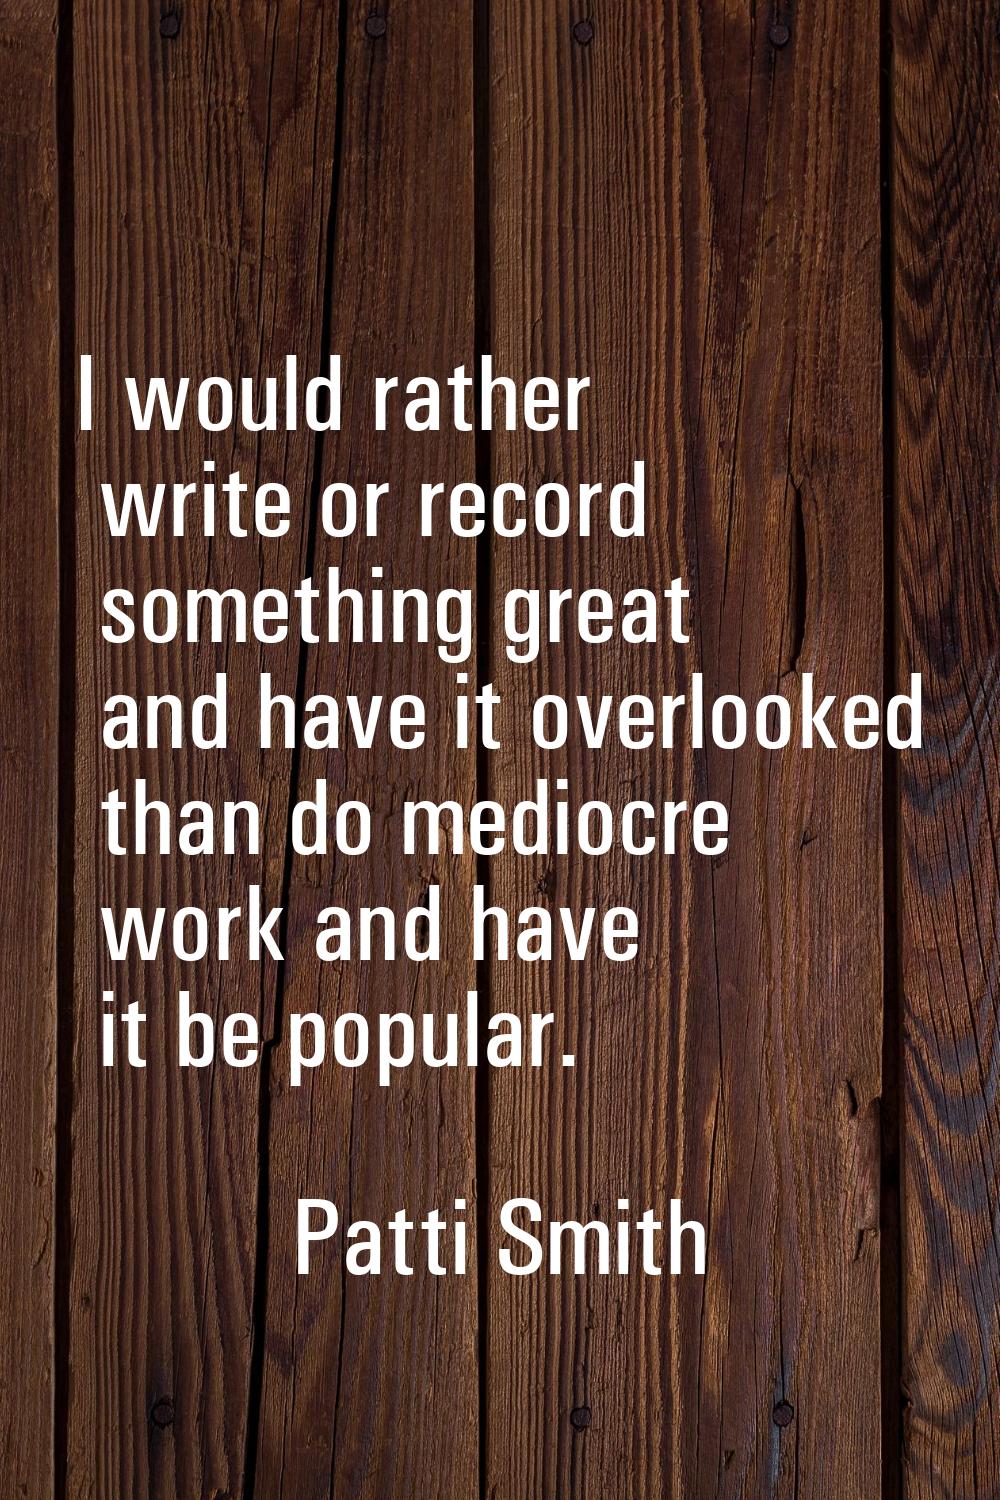 I would rather write or record something great and have it overlooked than do mediocre work and hav